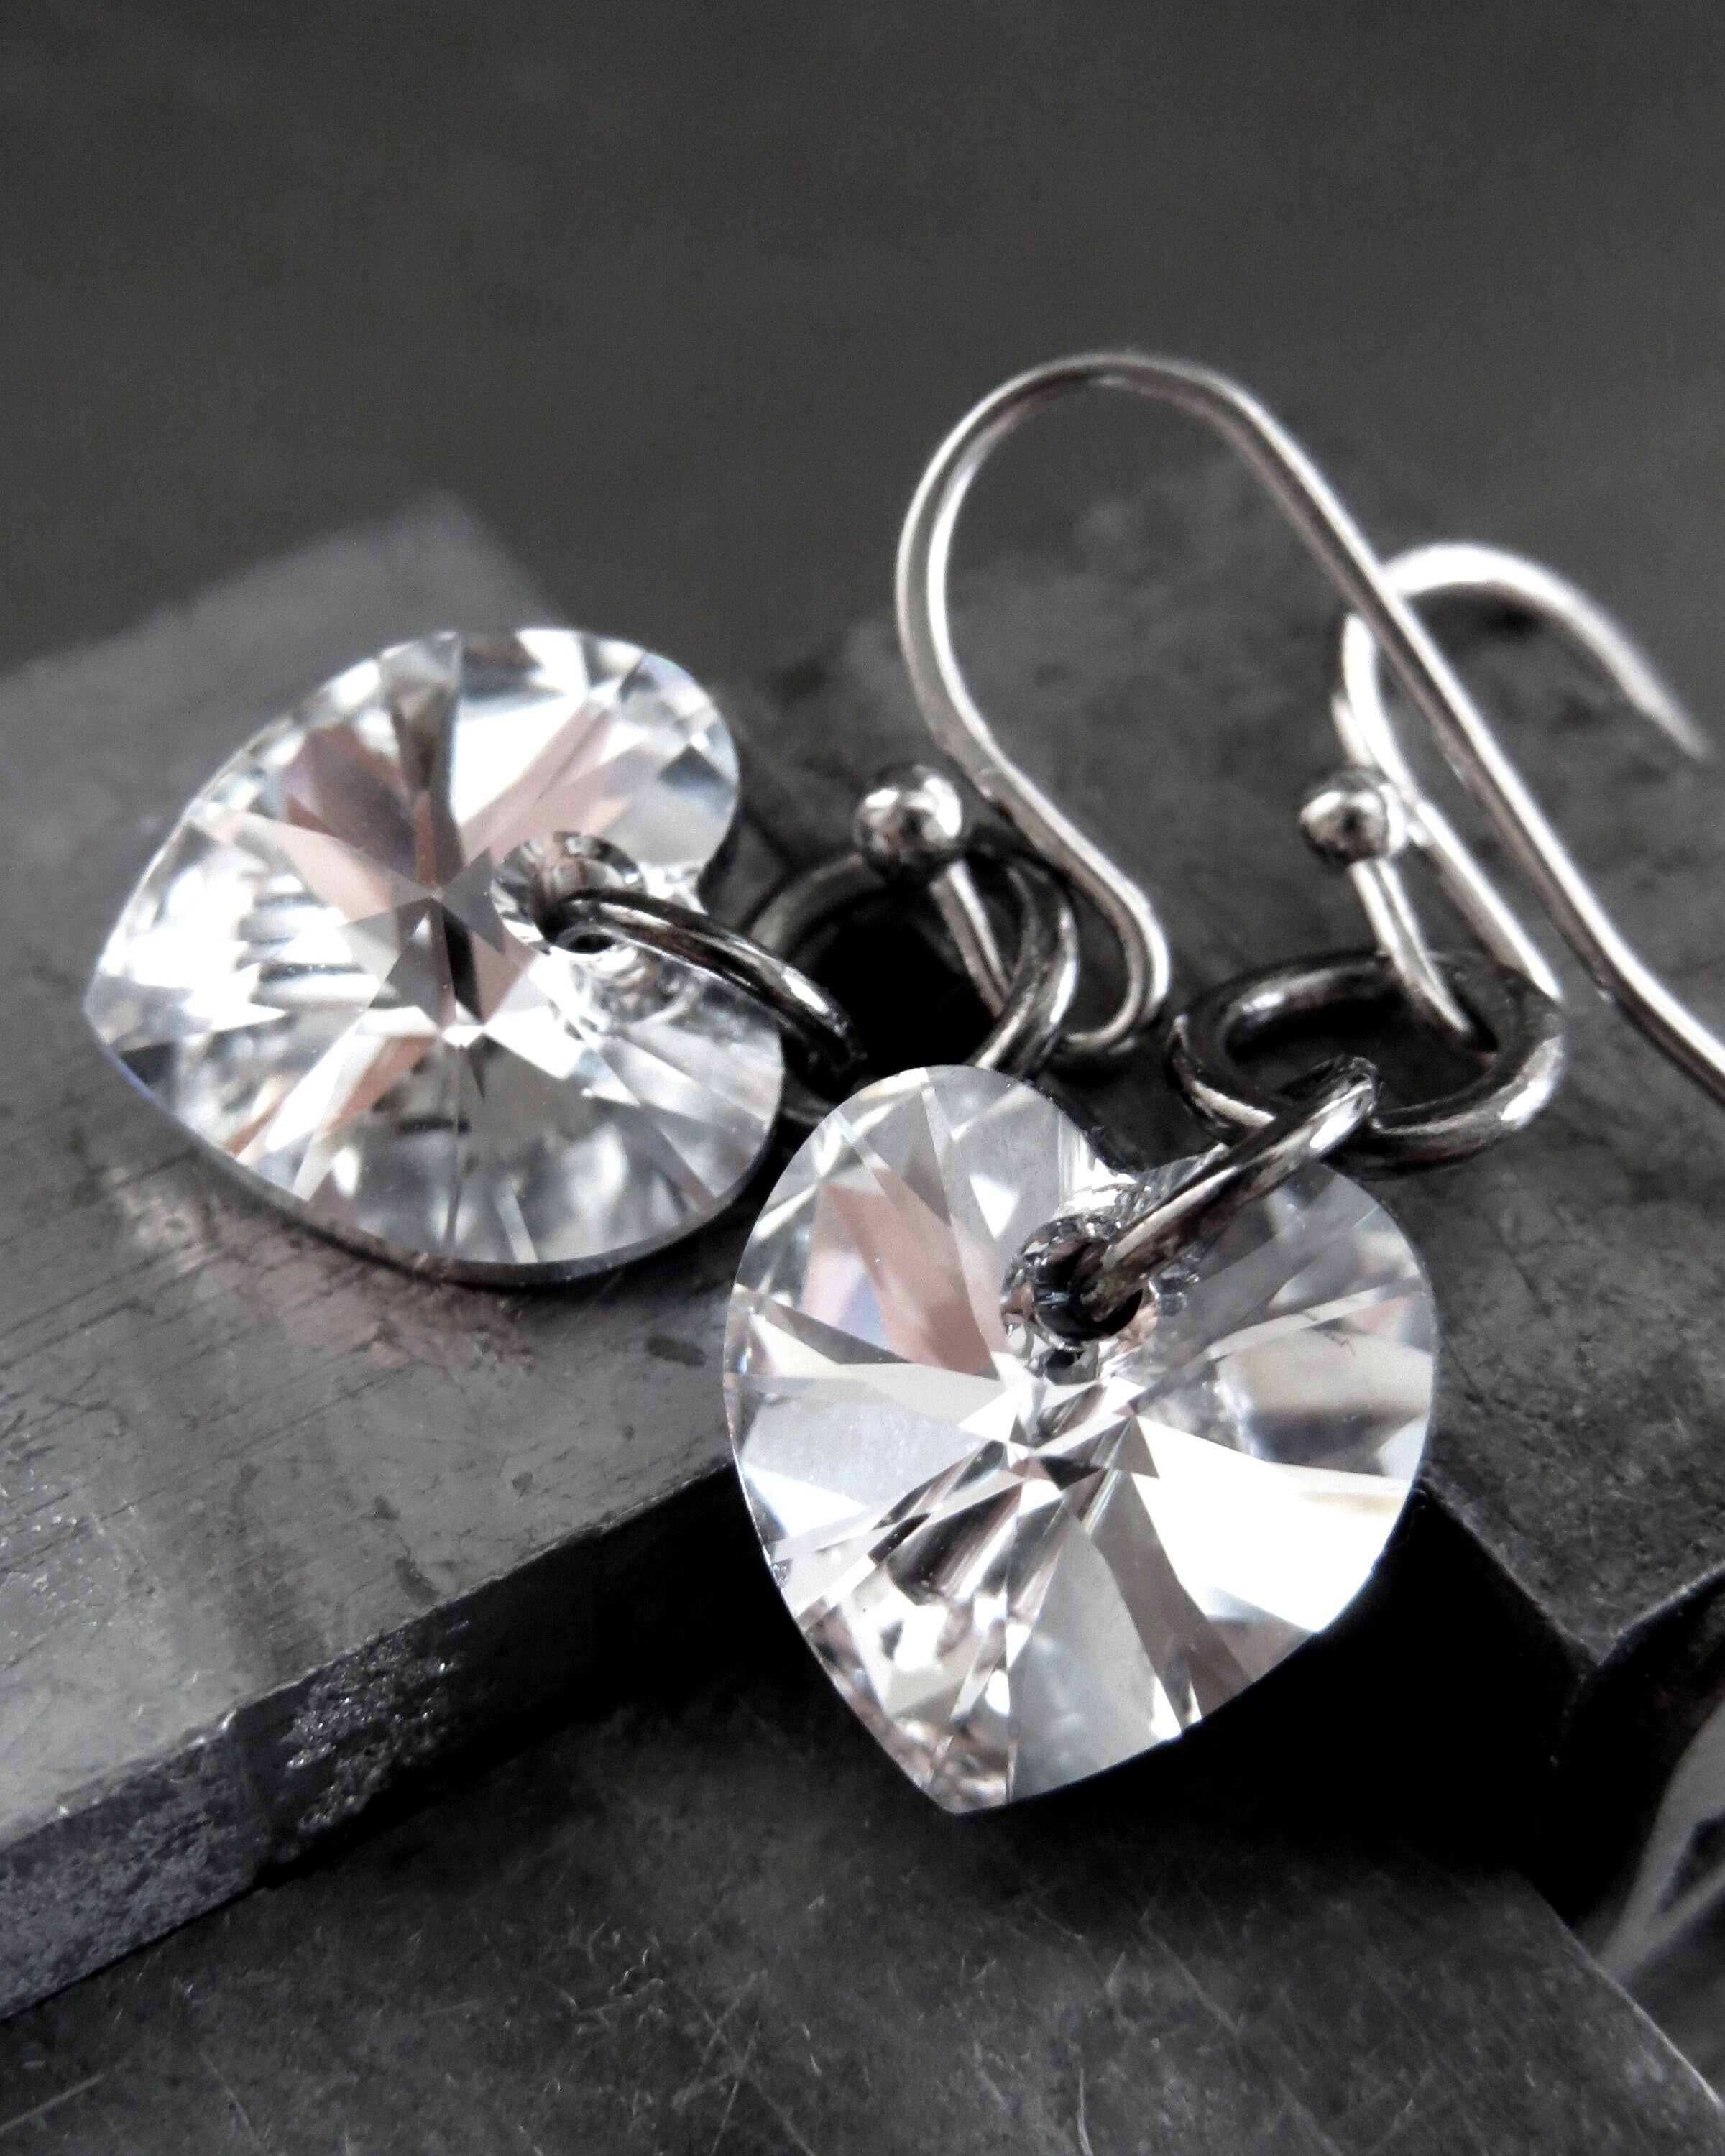 Super Sparkly Small Crystal Heart Earrings - Brilliant Flash and Sparkle - Romantic Clear Crystal Heart Earrings, Valentines Day Jewelry